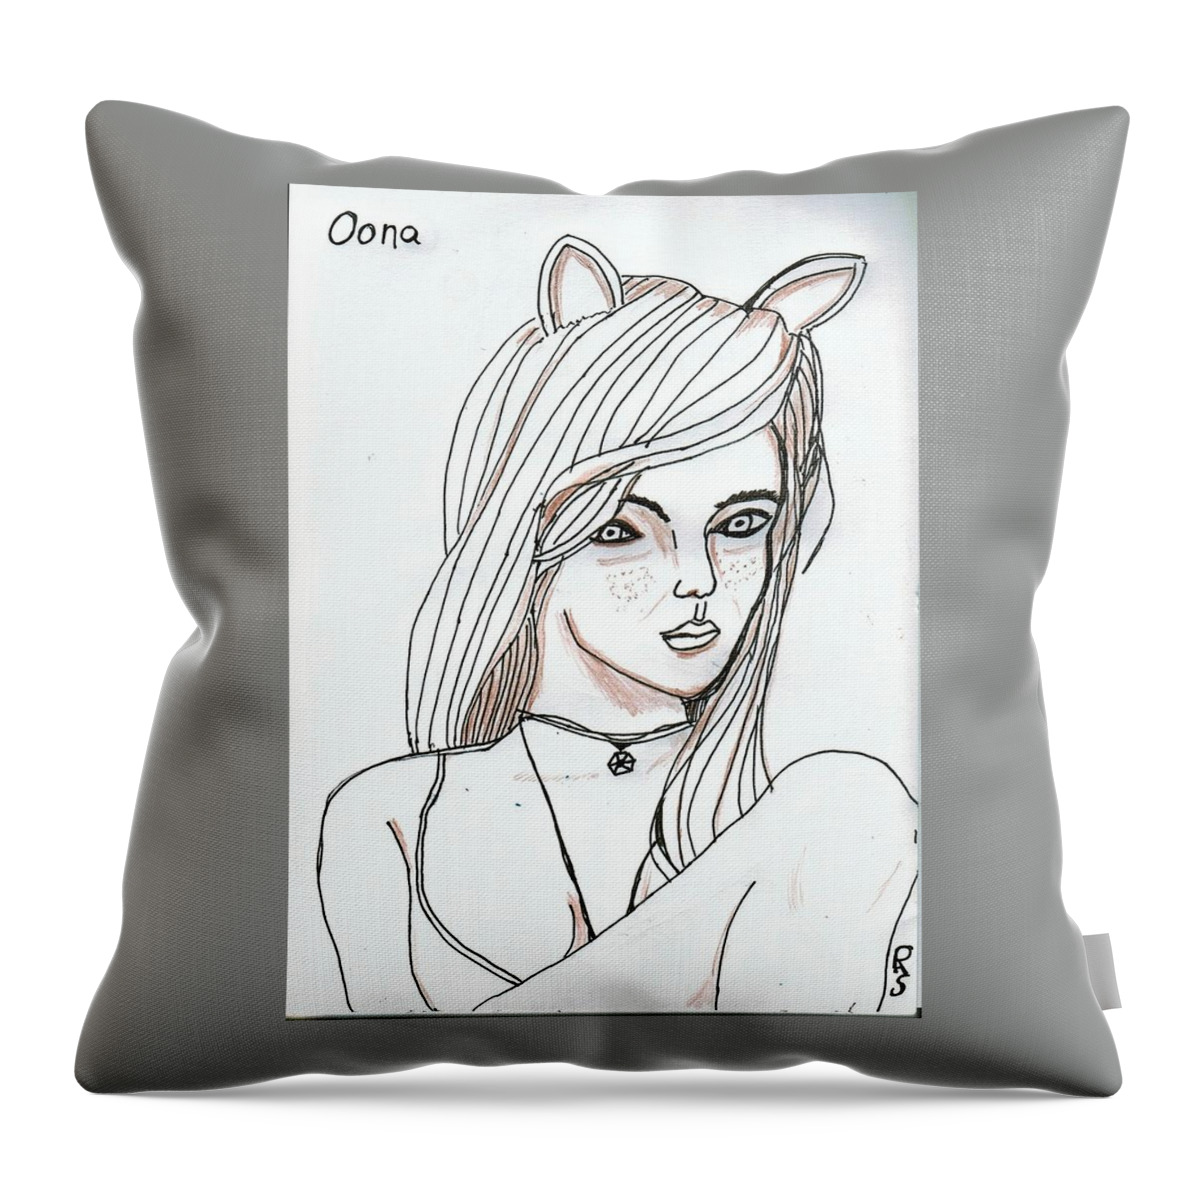 Oona Throw Pillow featuring the drawing Oona by Phil Strang